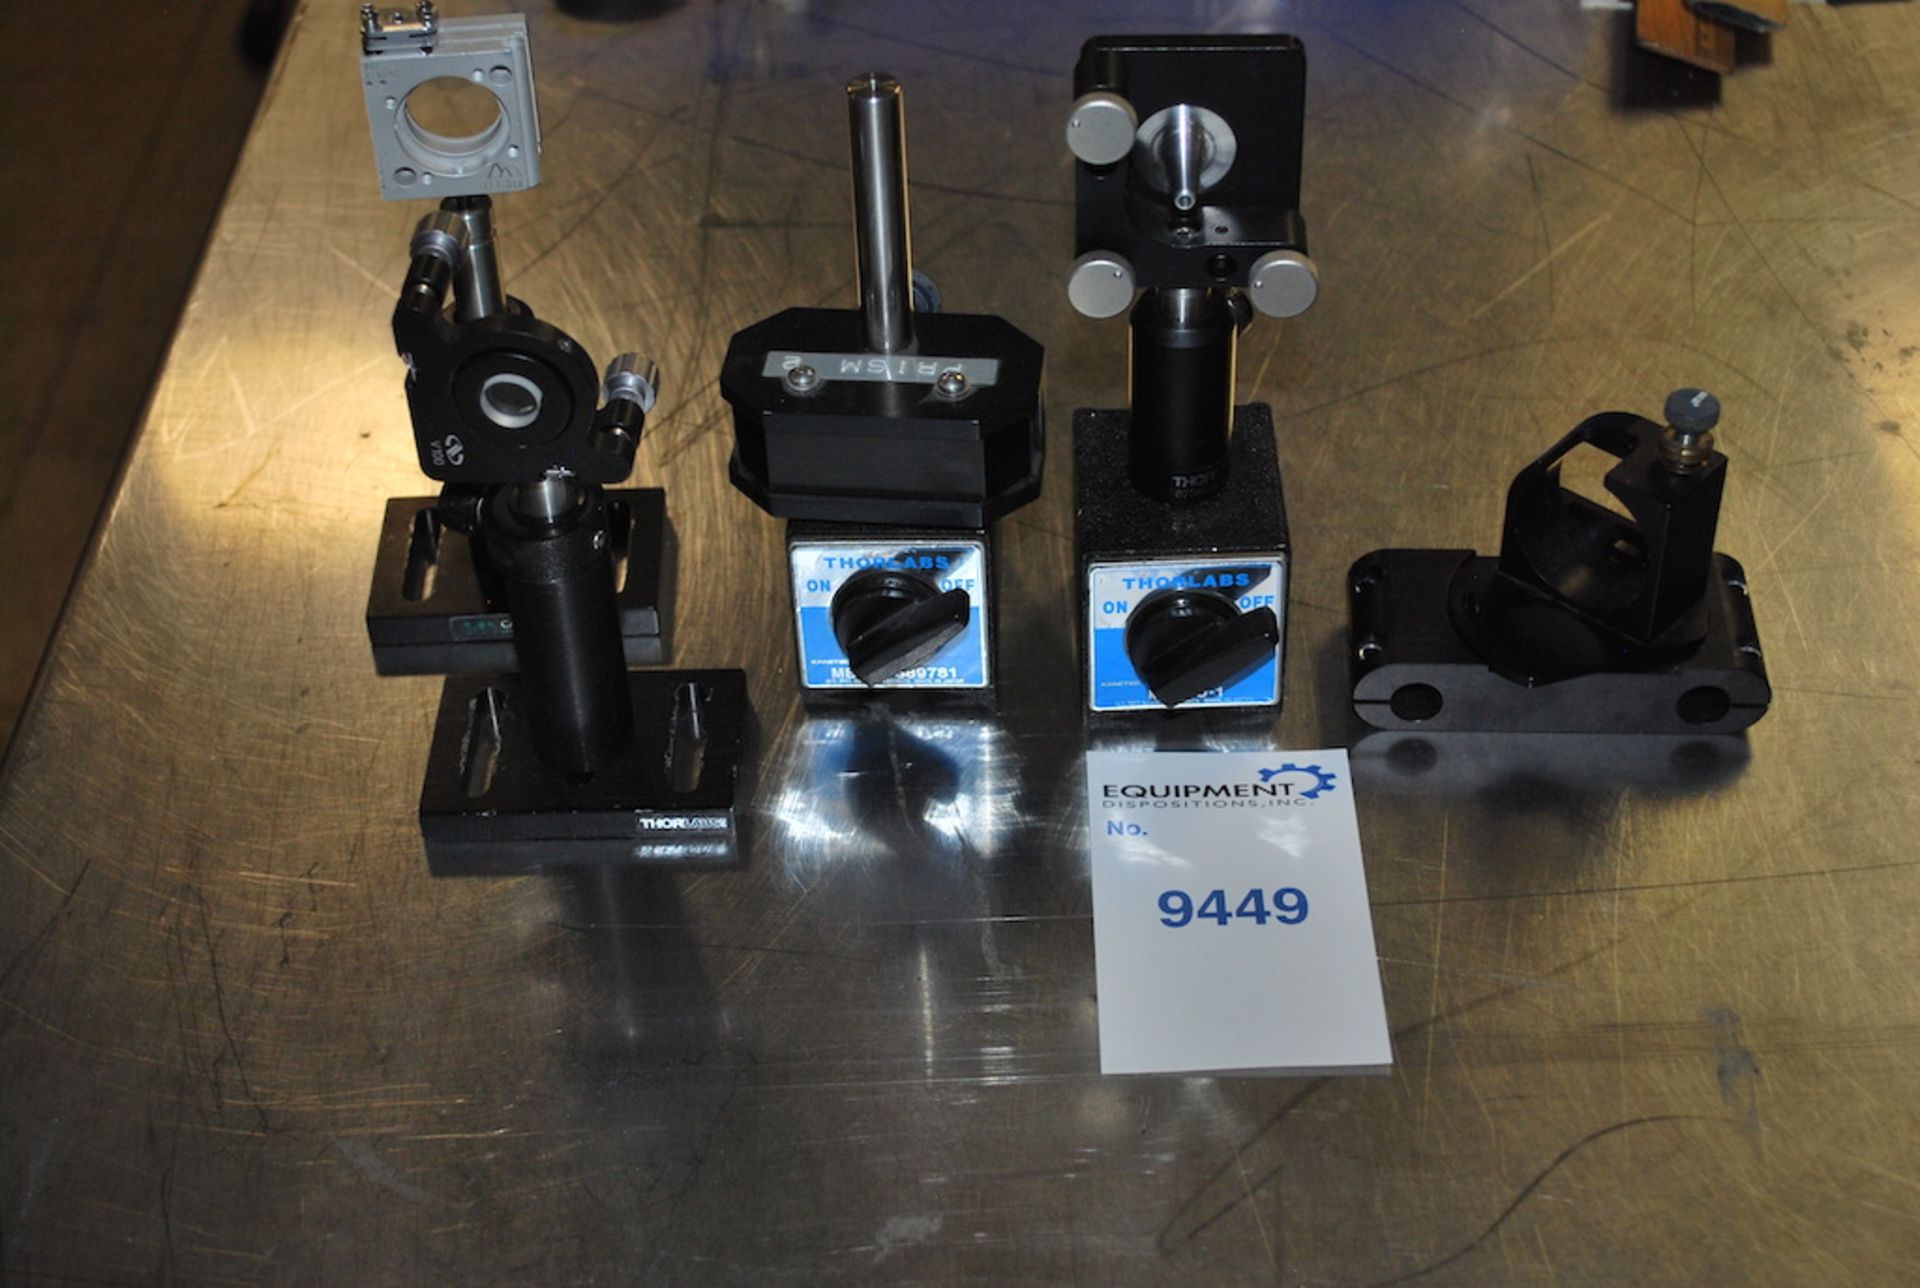 Qty-3 1" XY optical mounts on stands + Dispersion prism ( 25 % - 75% ratio )